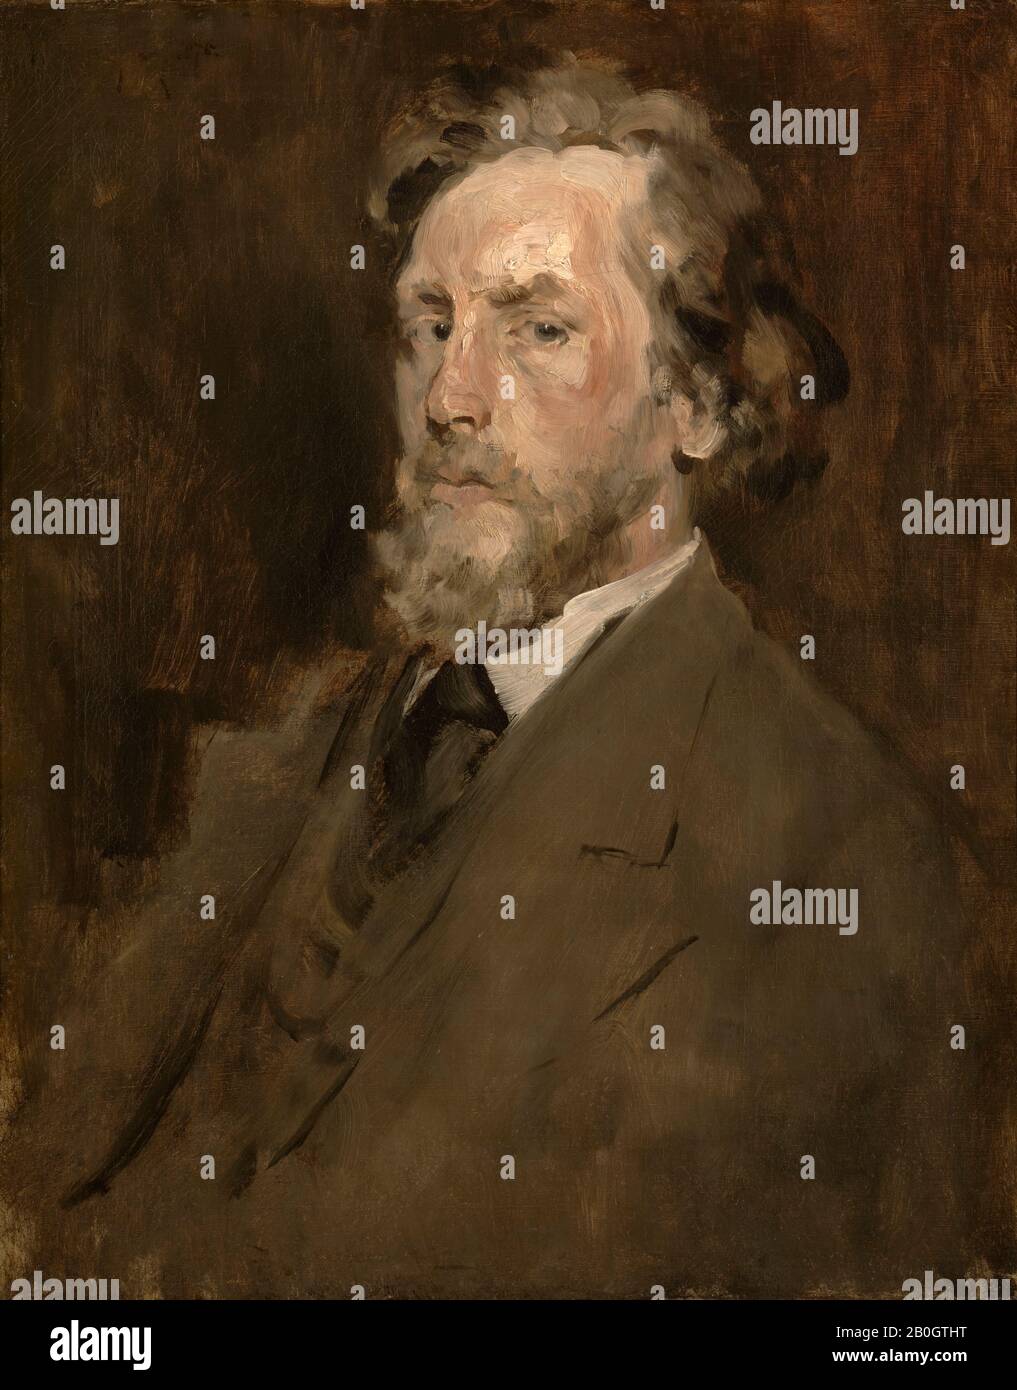 William Merritt Chase, American, 1849–1916, Portrait of a Man, c. 1875, Oil  on canvas, 24 x 19 in. (61 x 48.3 cm Stock Photo - Alamy